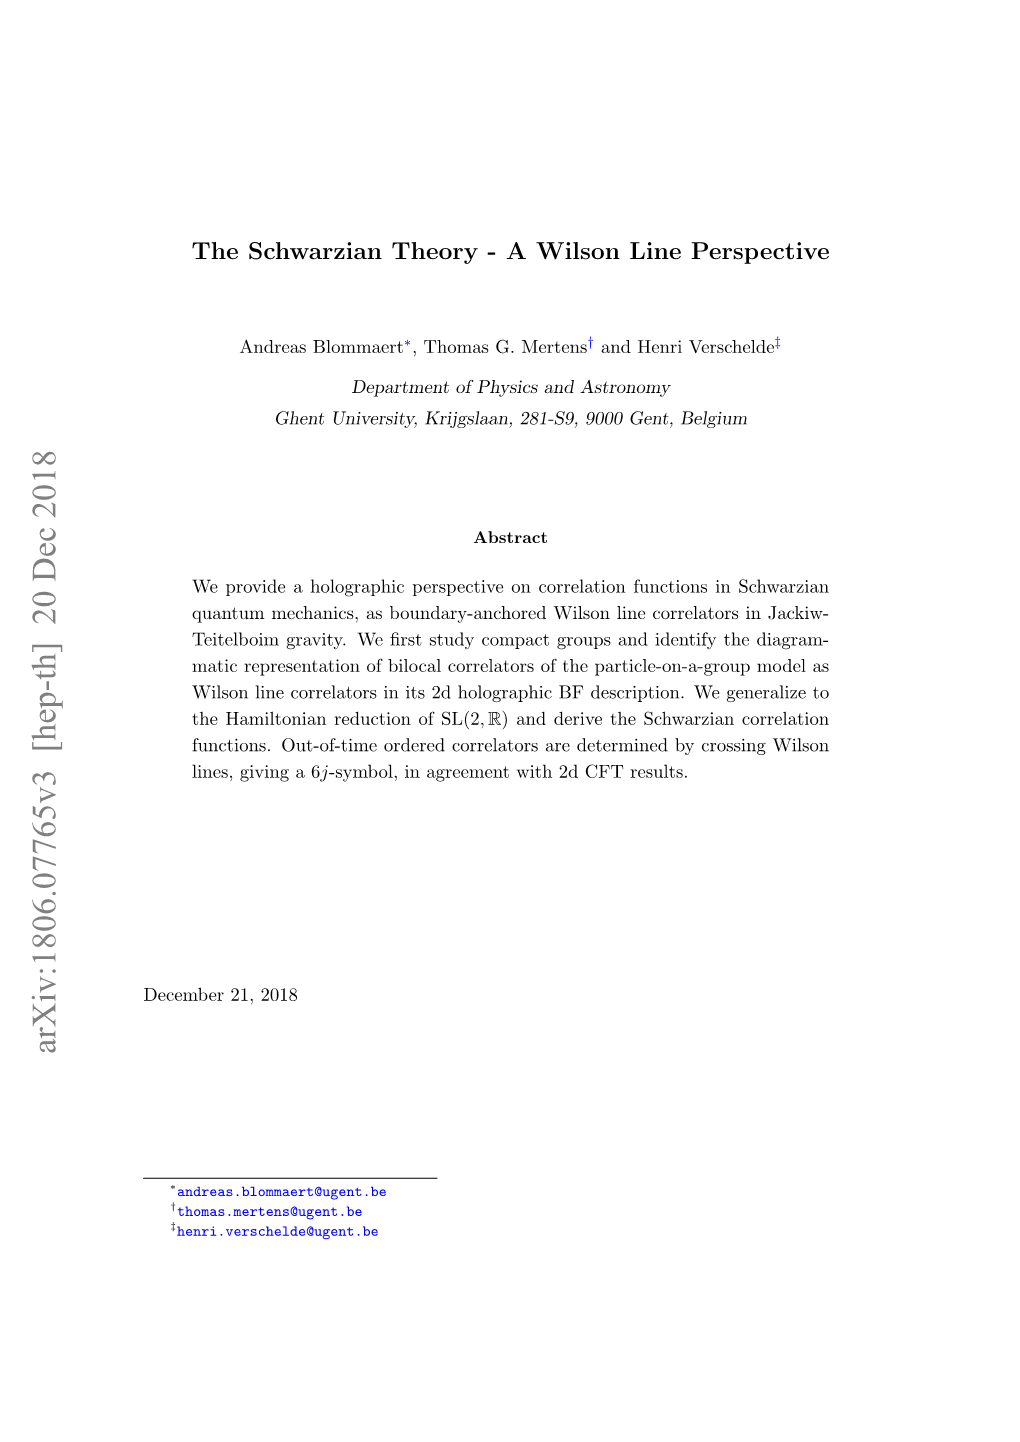 The Schwarzian Theory-A Wilson Line Perspective